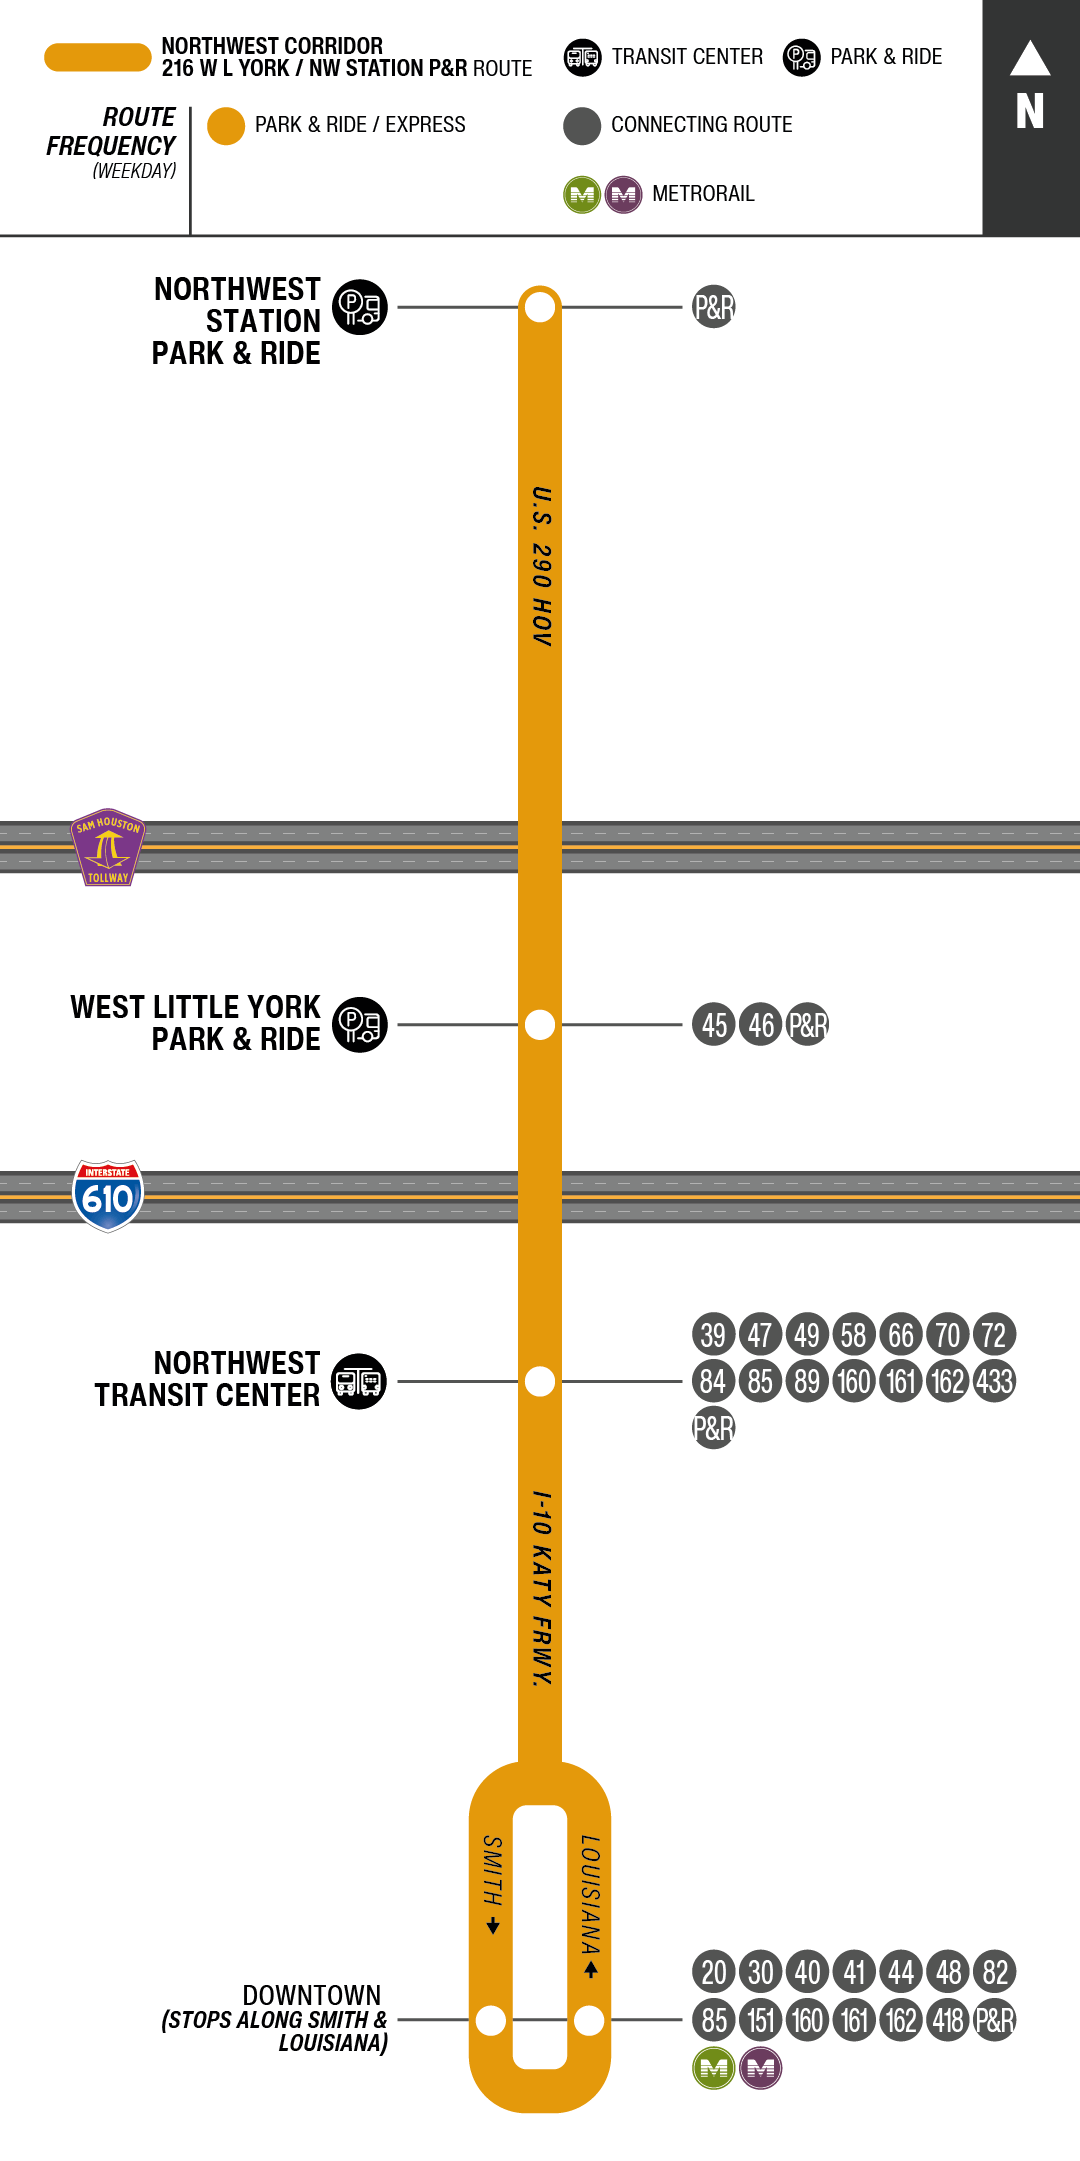 Route map for 216 West Little York / Northwest Station Park & Ride bus